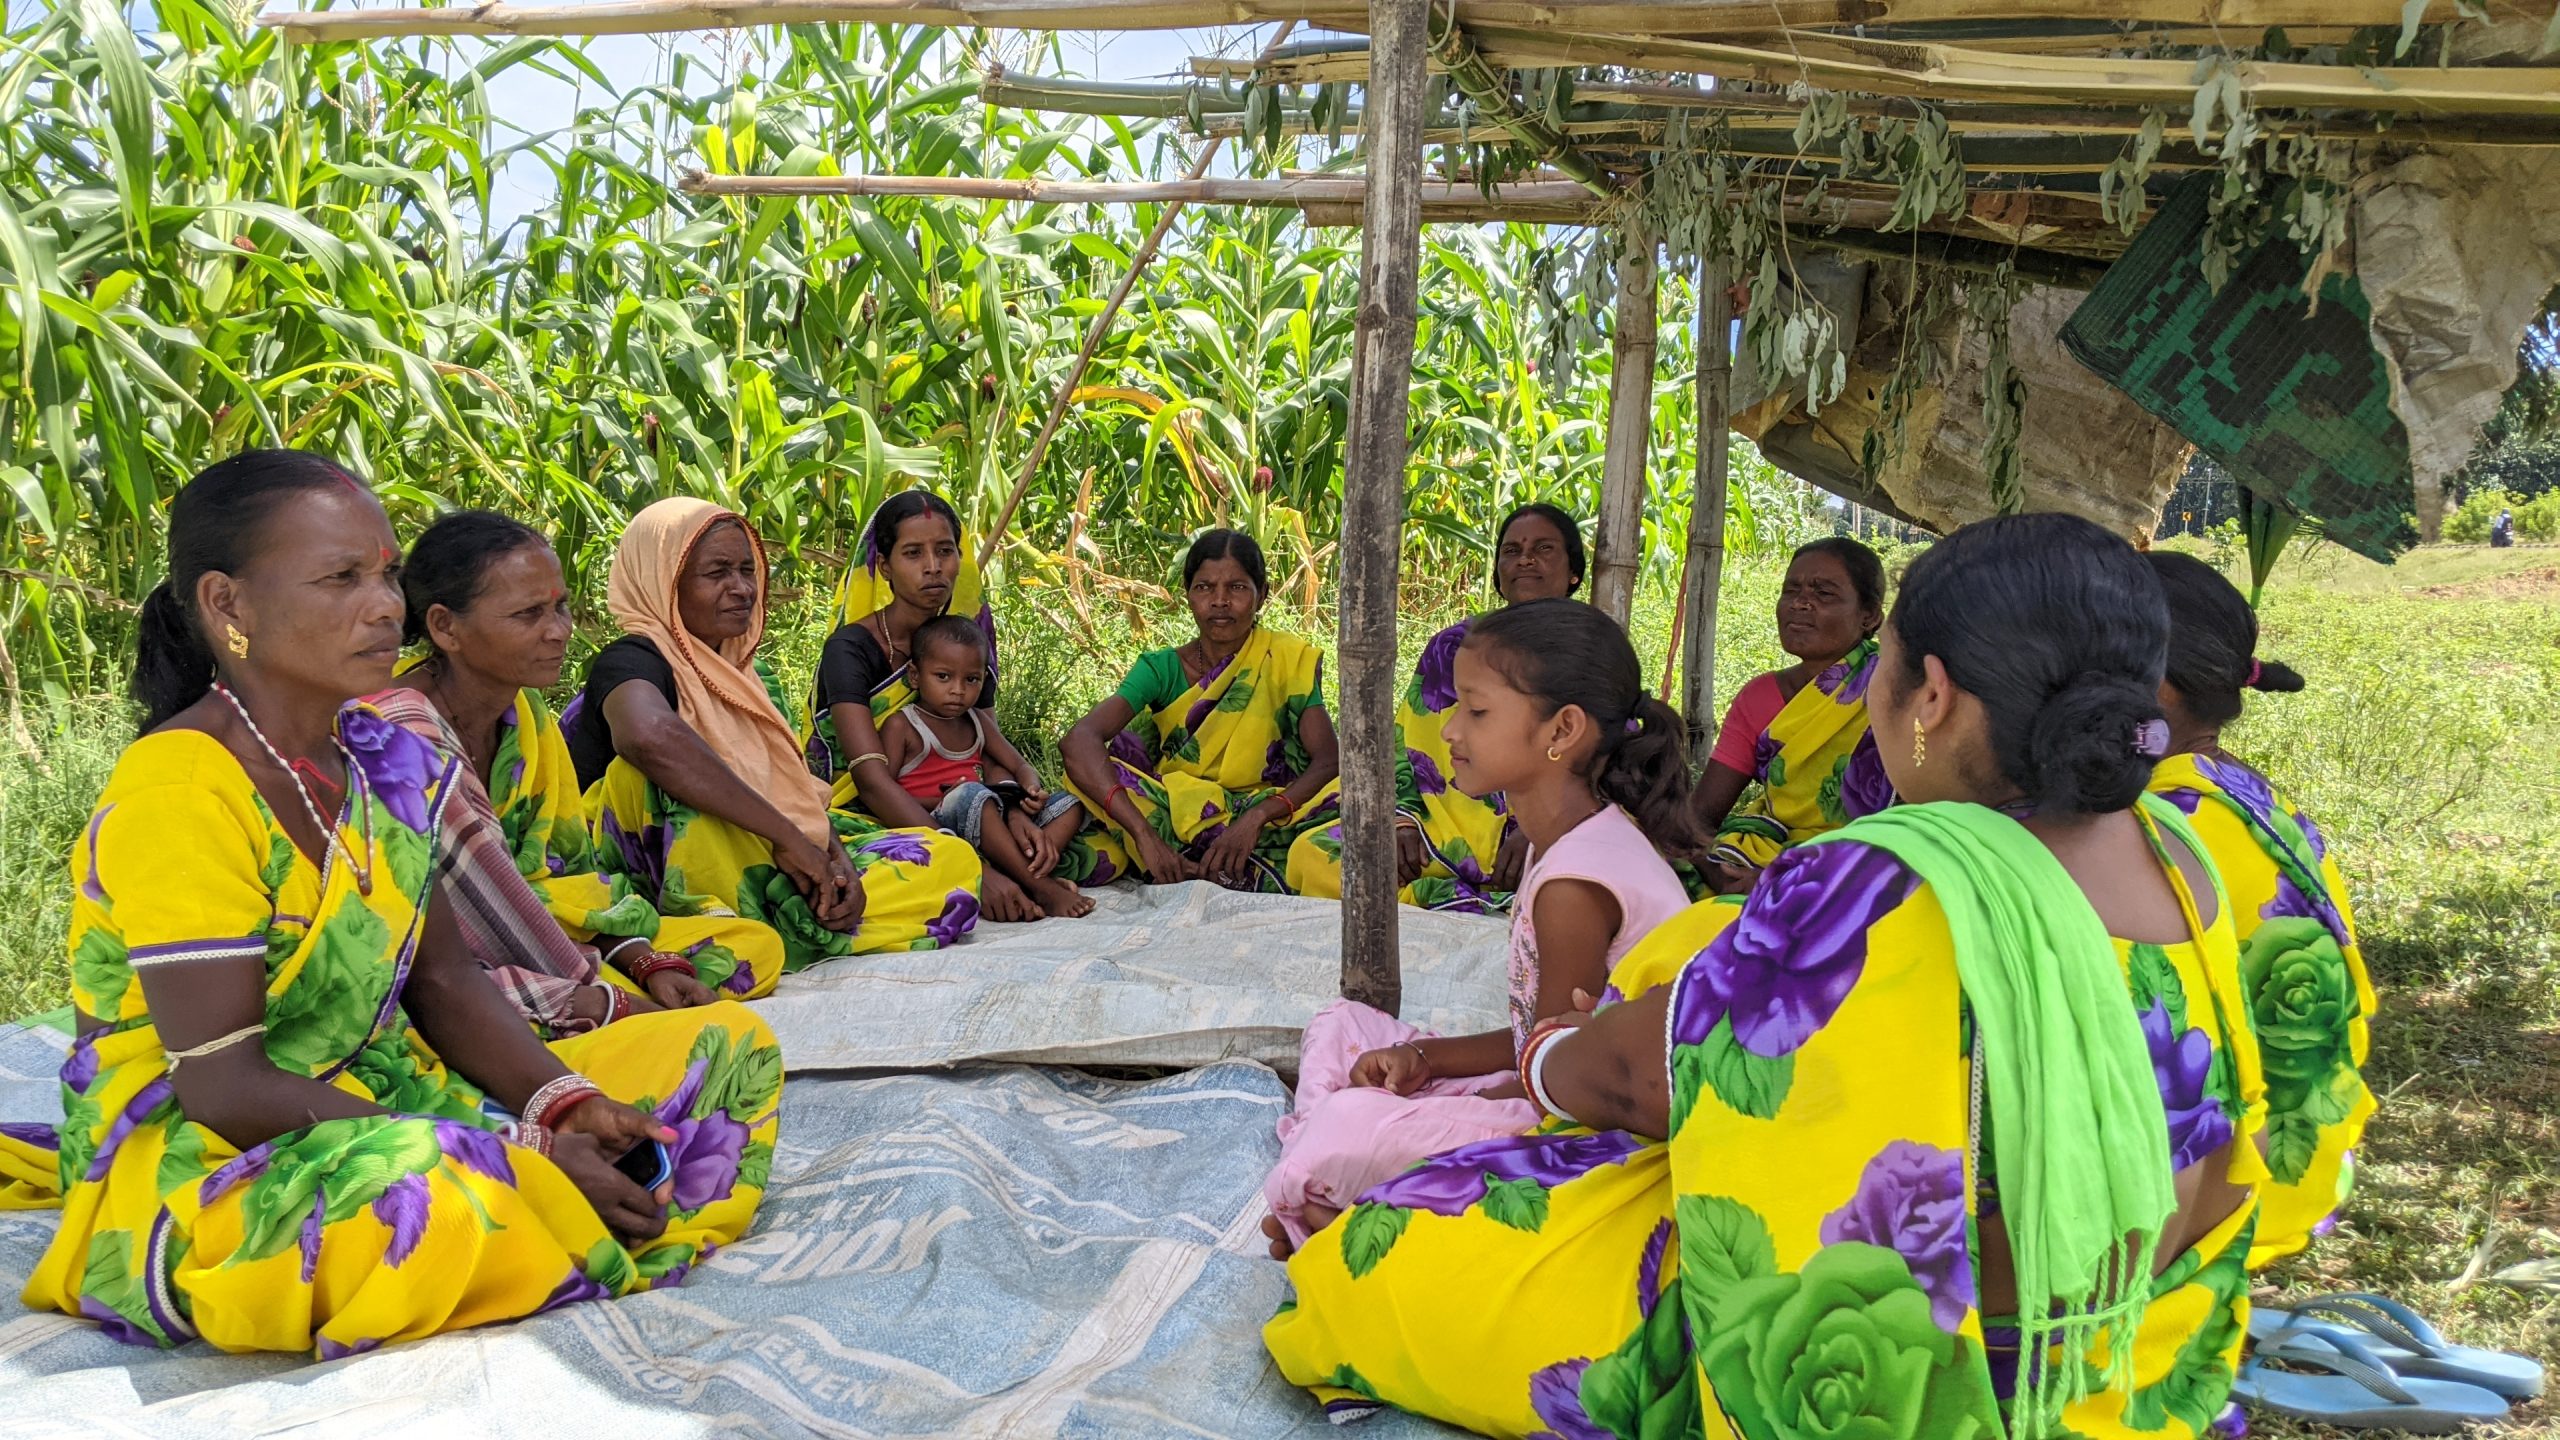 Anita Naik (first from left) meets with her self-help group Biswa Jay Maa Tarini in village of Badbil, in the Mayurbhanj district of India’s Odisha state. Together, they work on a five-acre lease land, where they grow maize commercially. (Photo: CIMMYT)